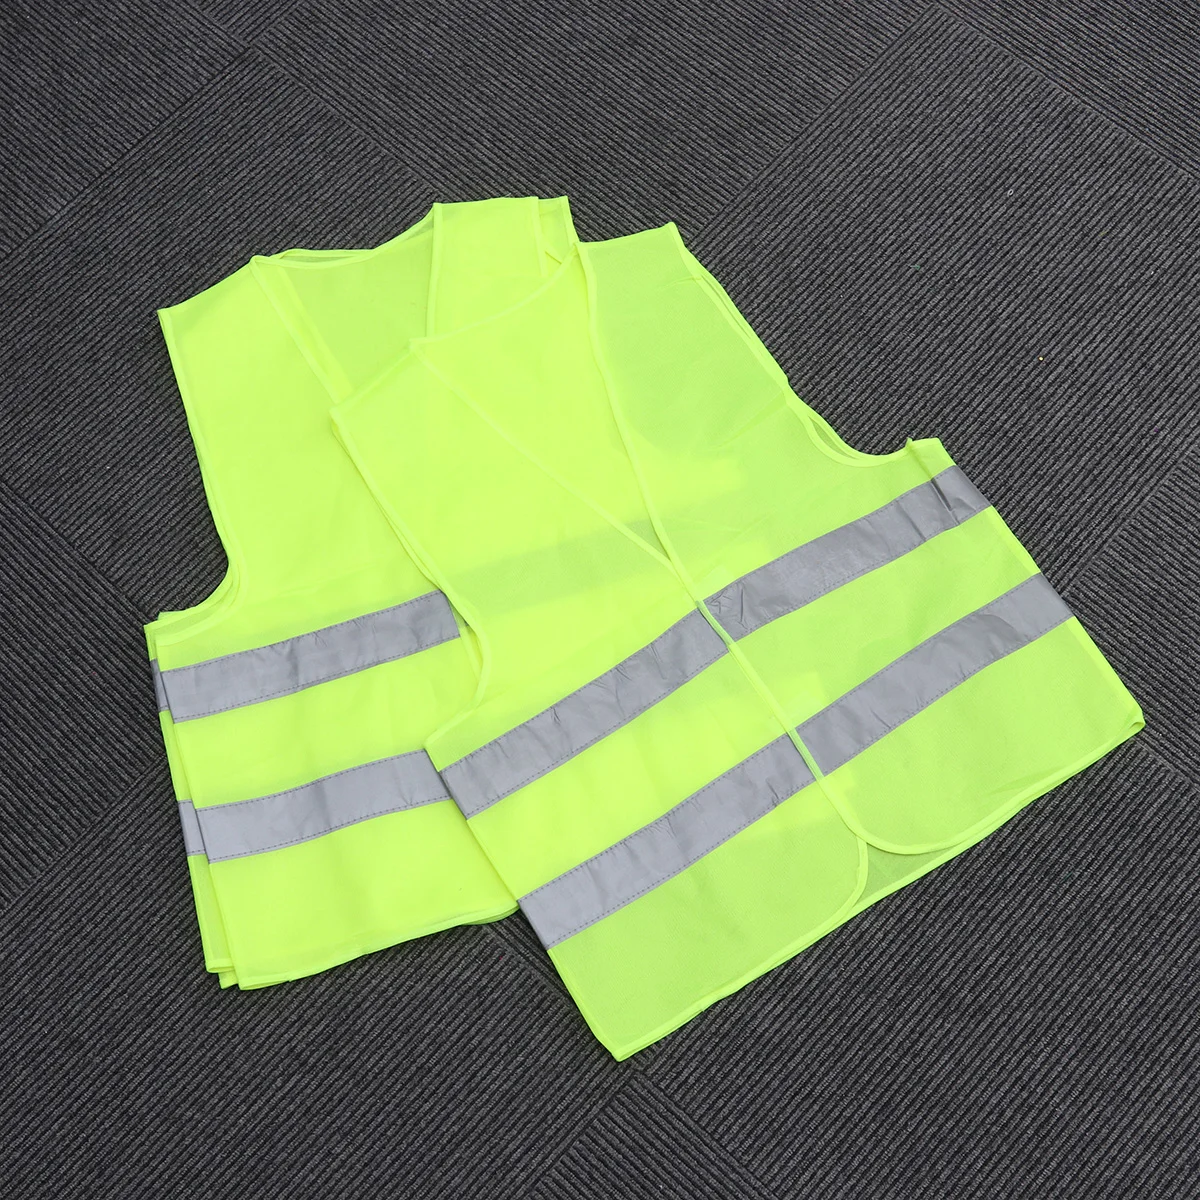 

4 PCS High Visibility Cycling Riding Vests Reflective Safety Vests Jackets for Outdoor Construction Work Safety Road Traffic